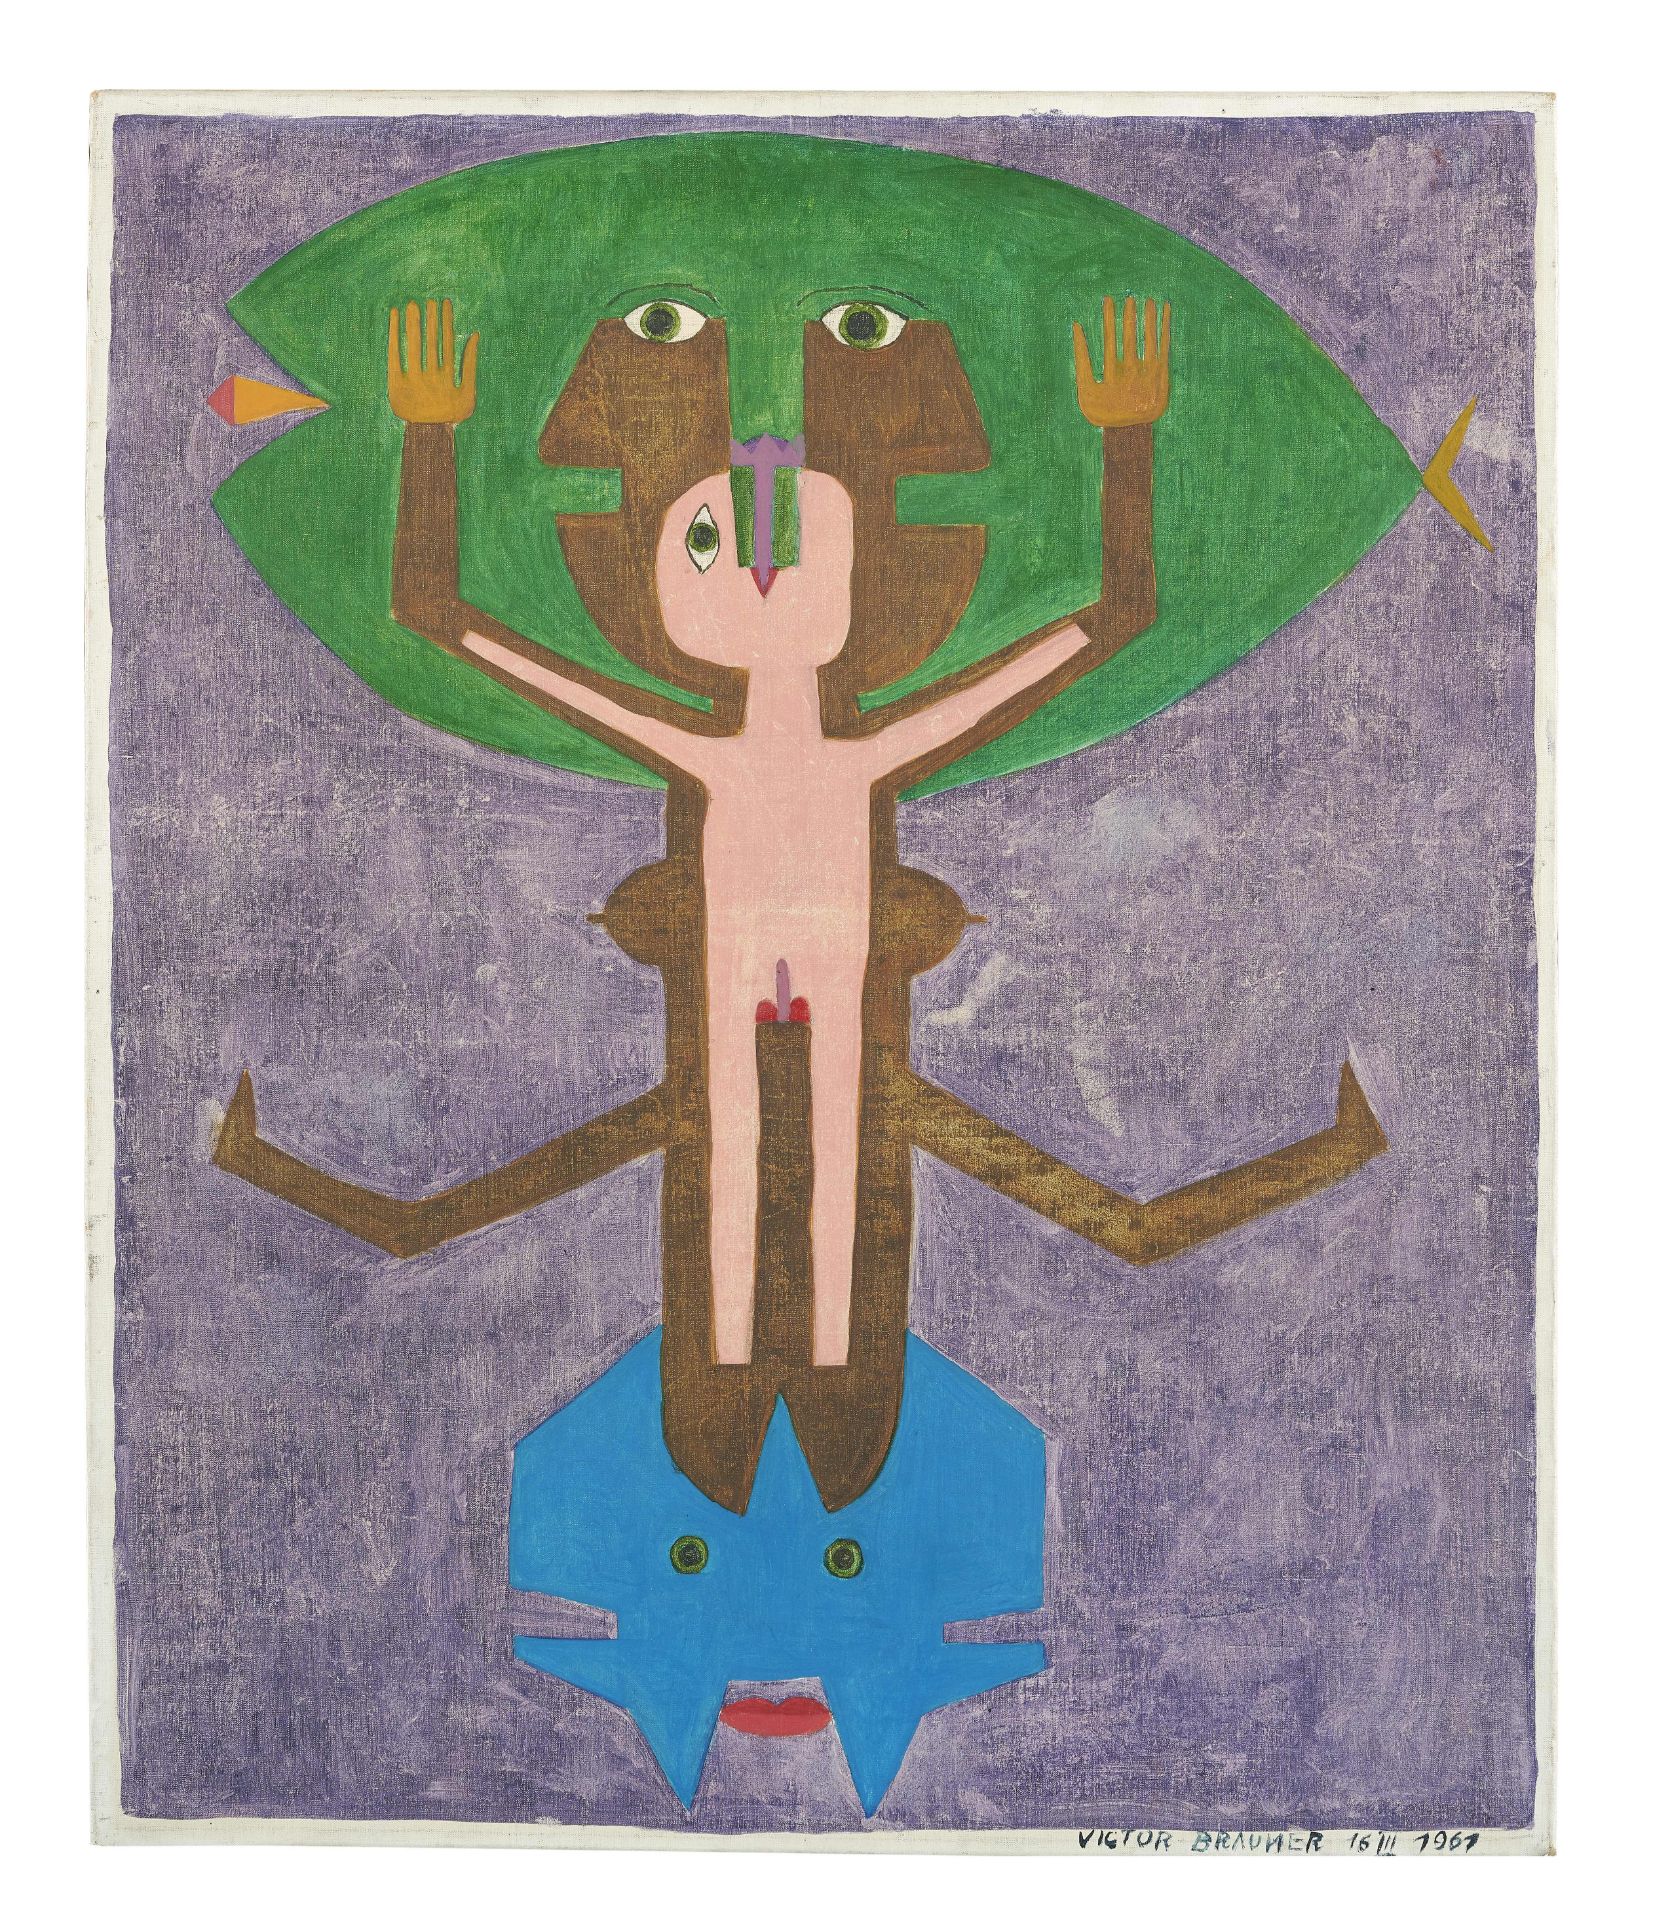 VICTOR BRAUNER (1903-1966) Composition (Painted on 16 March 1961)